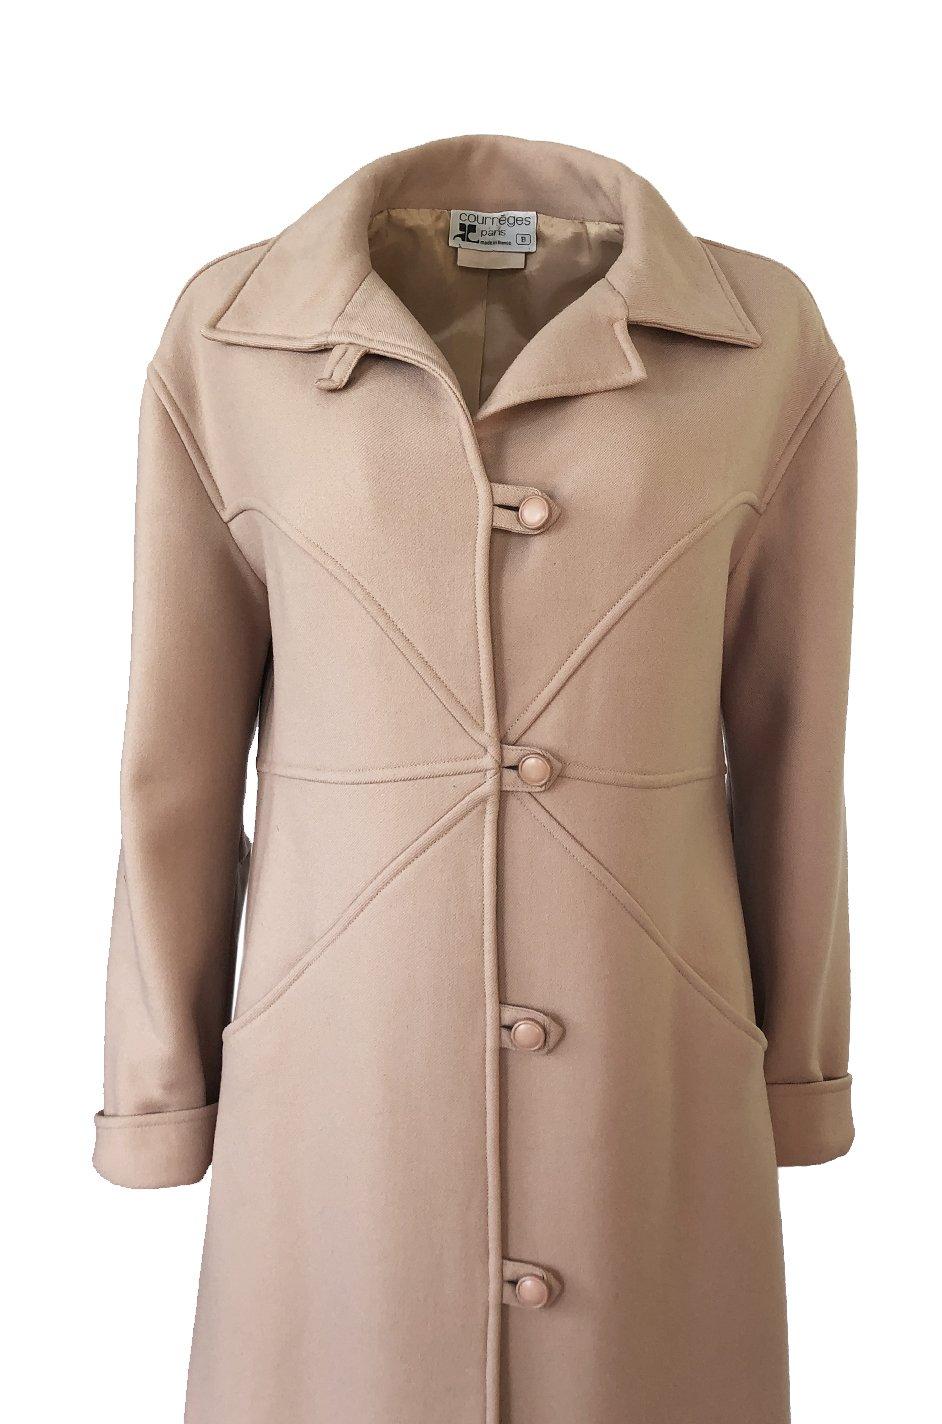 Immaculate 1960s Courreges Unusually Seamed Camel Toggle Coat 2